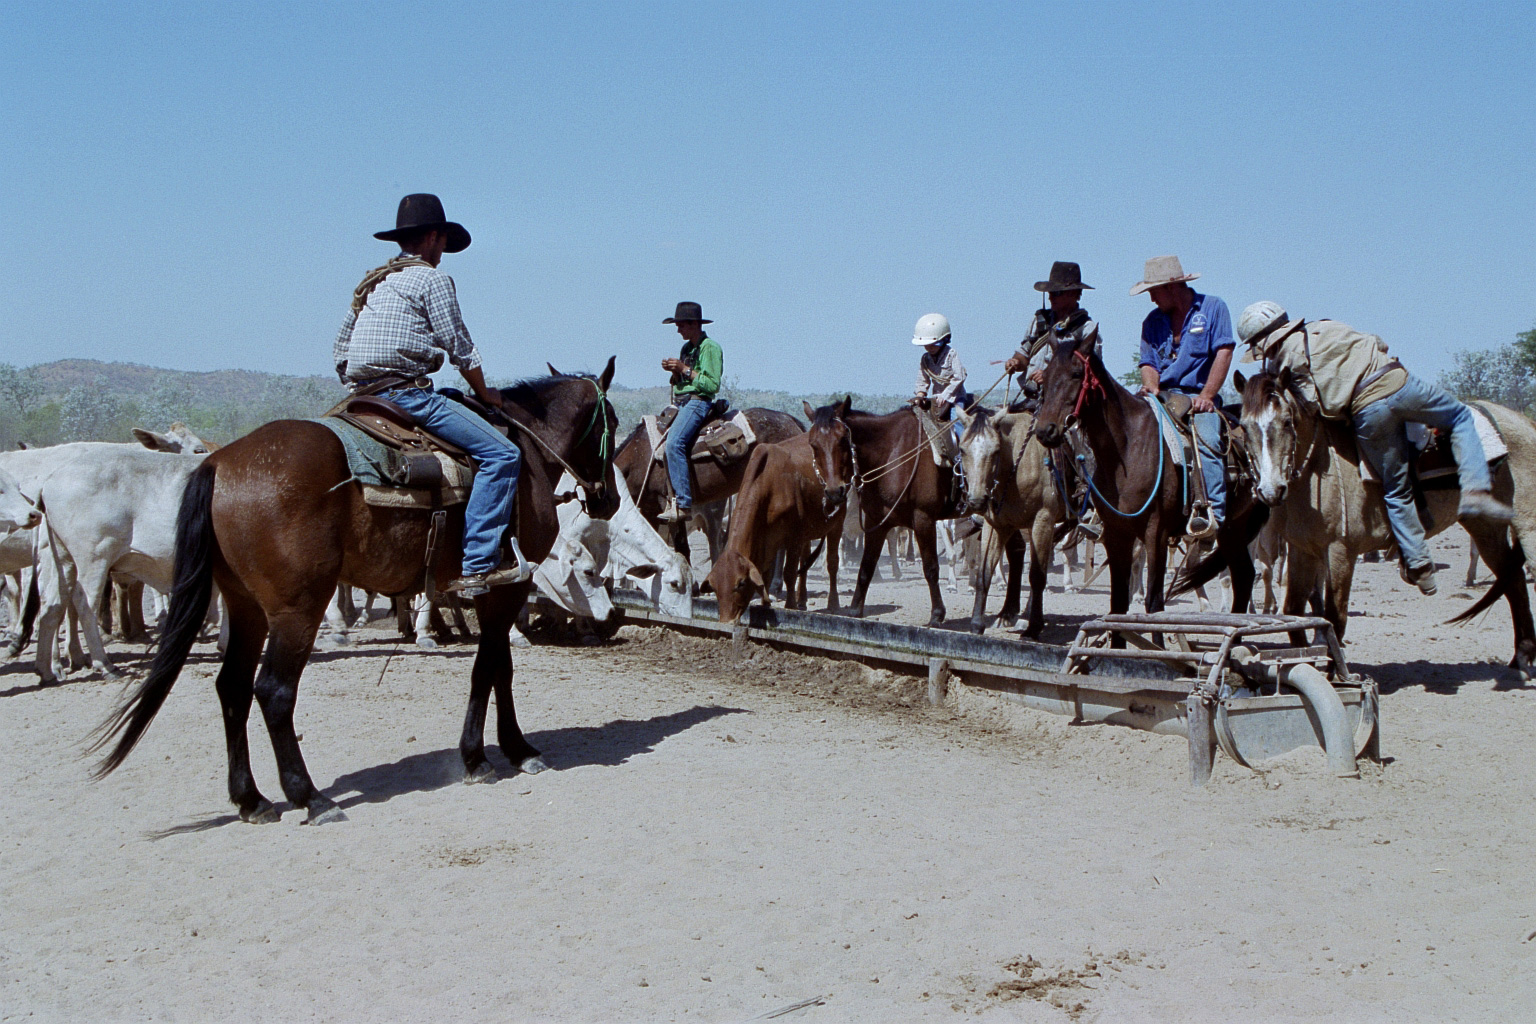 Working as a ringer on a station. Watering horses and cattle.